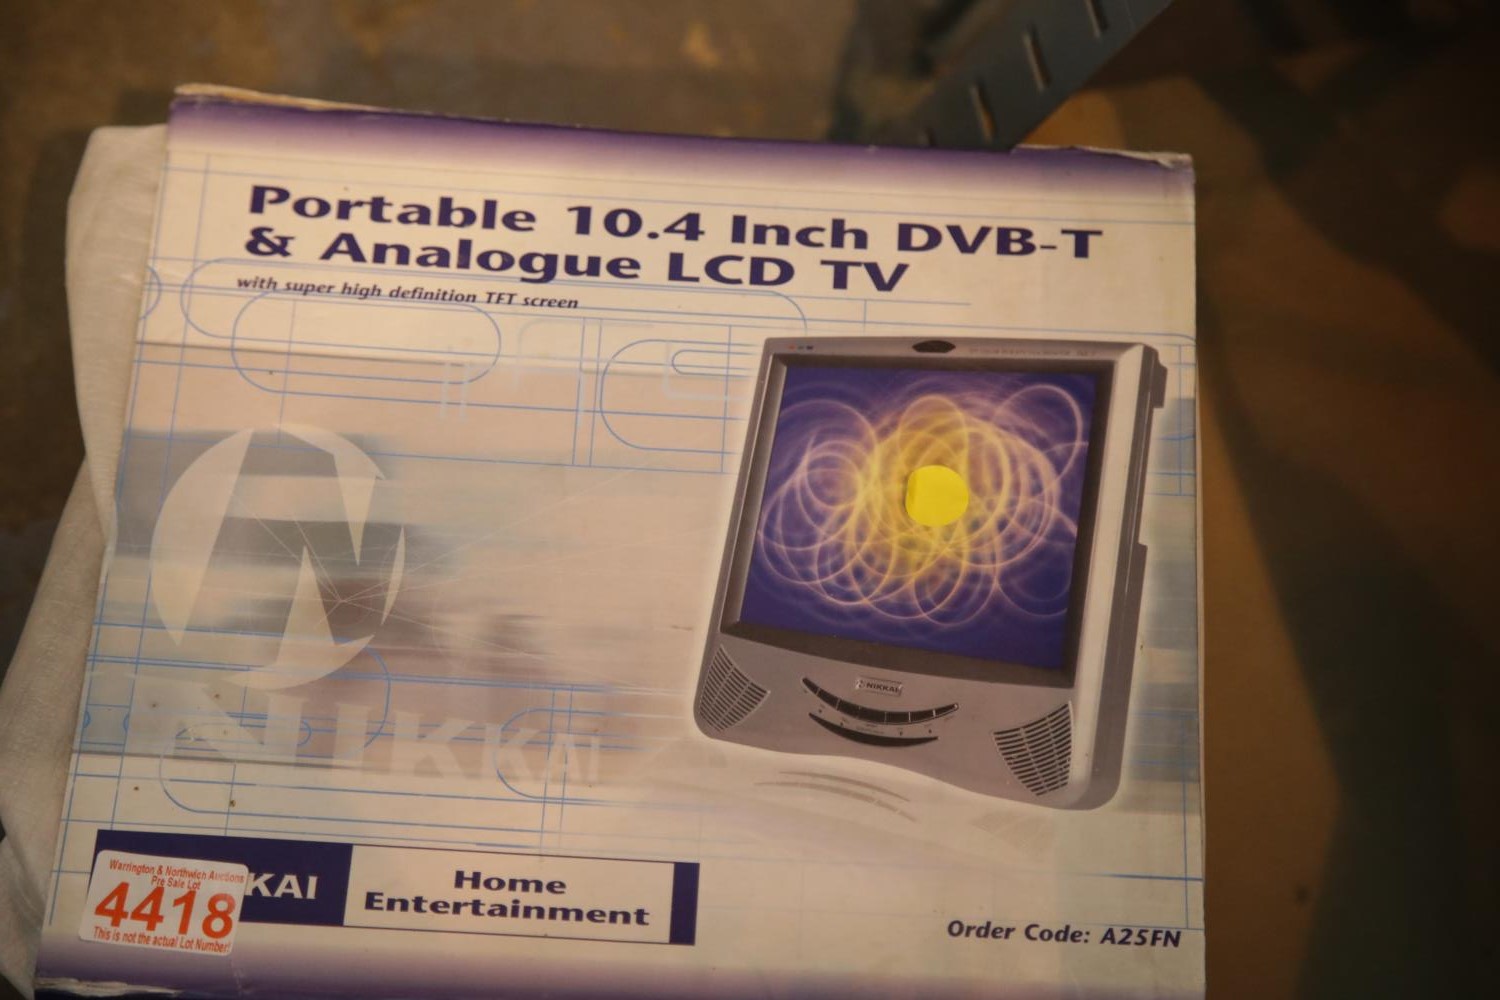 Boxed portable 10.4" DVB-T and analogue LCD TV. This lot is not available for in-house P&P